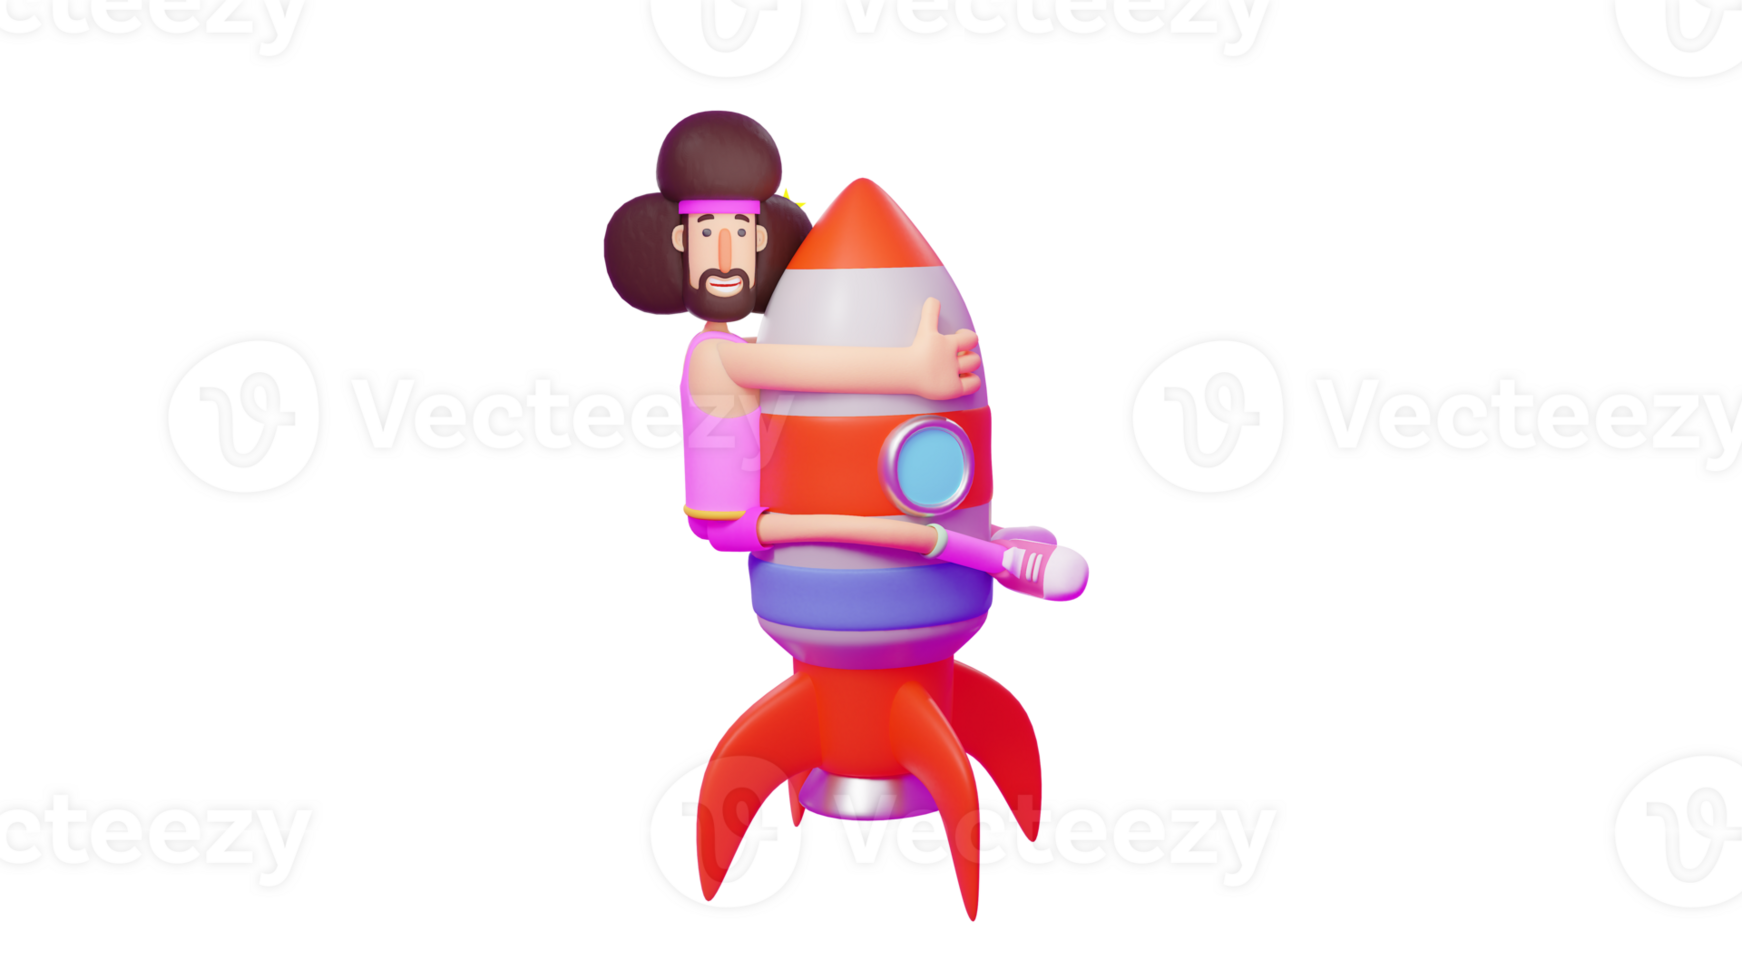 3D illustration. Incredible Athlete 3D cartoon character. Athlete hugging a big rocket that is about to fly. A unique athlete who wears a pink costume and has a unique hairdo. 3D cartoon character png